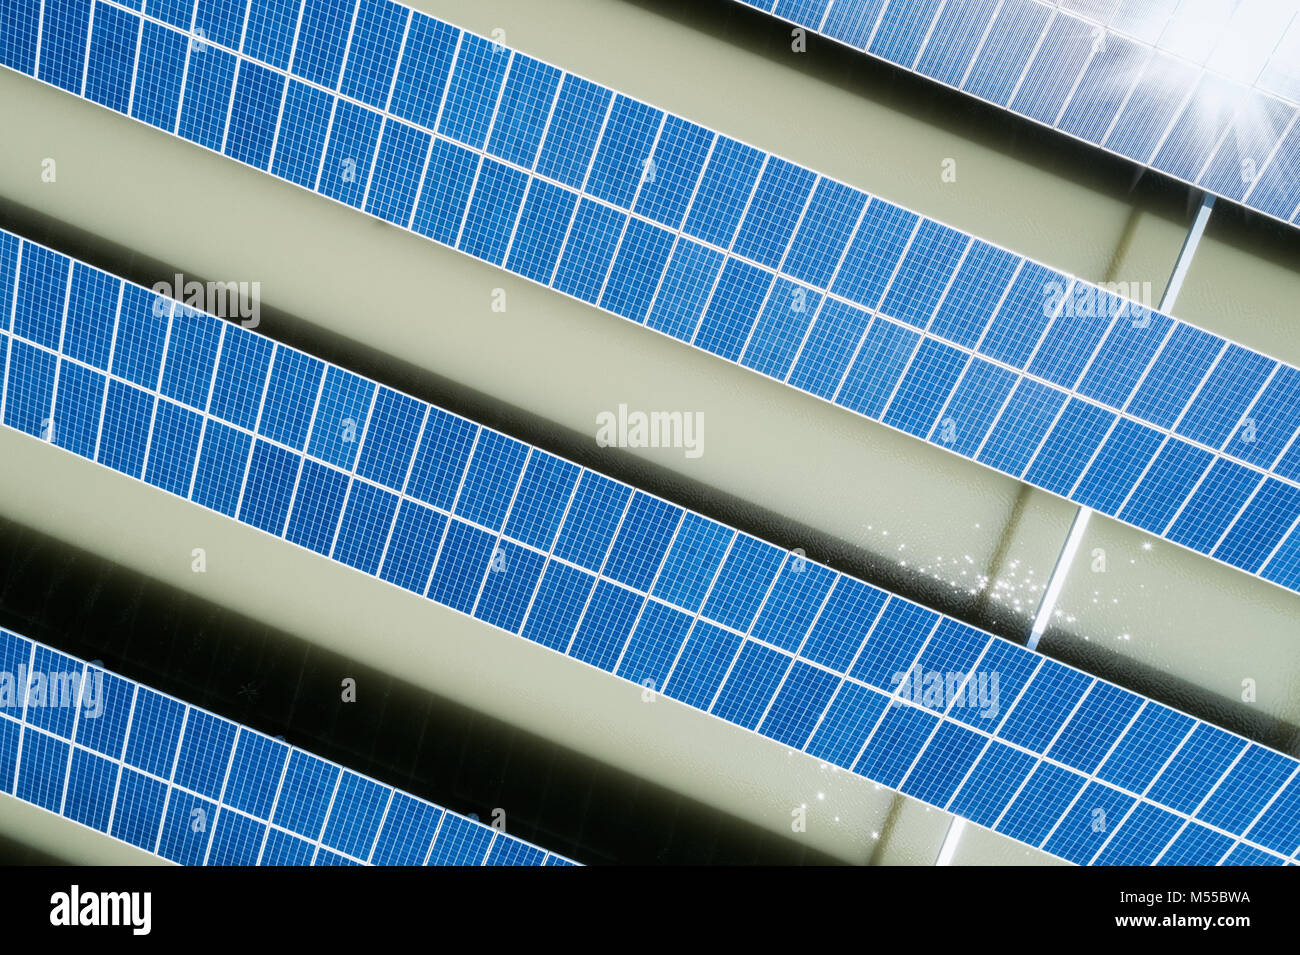 solar panel on the surface of water Stock Photo